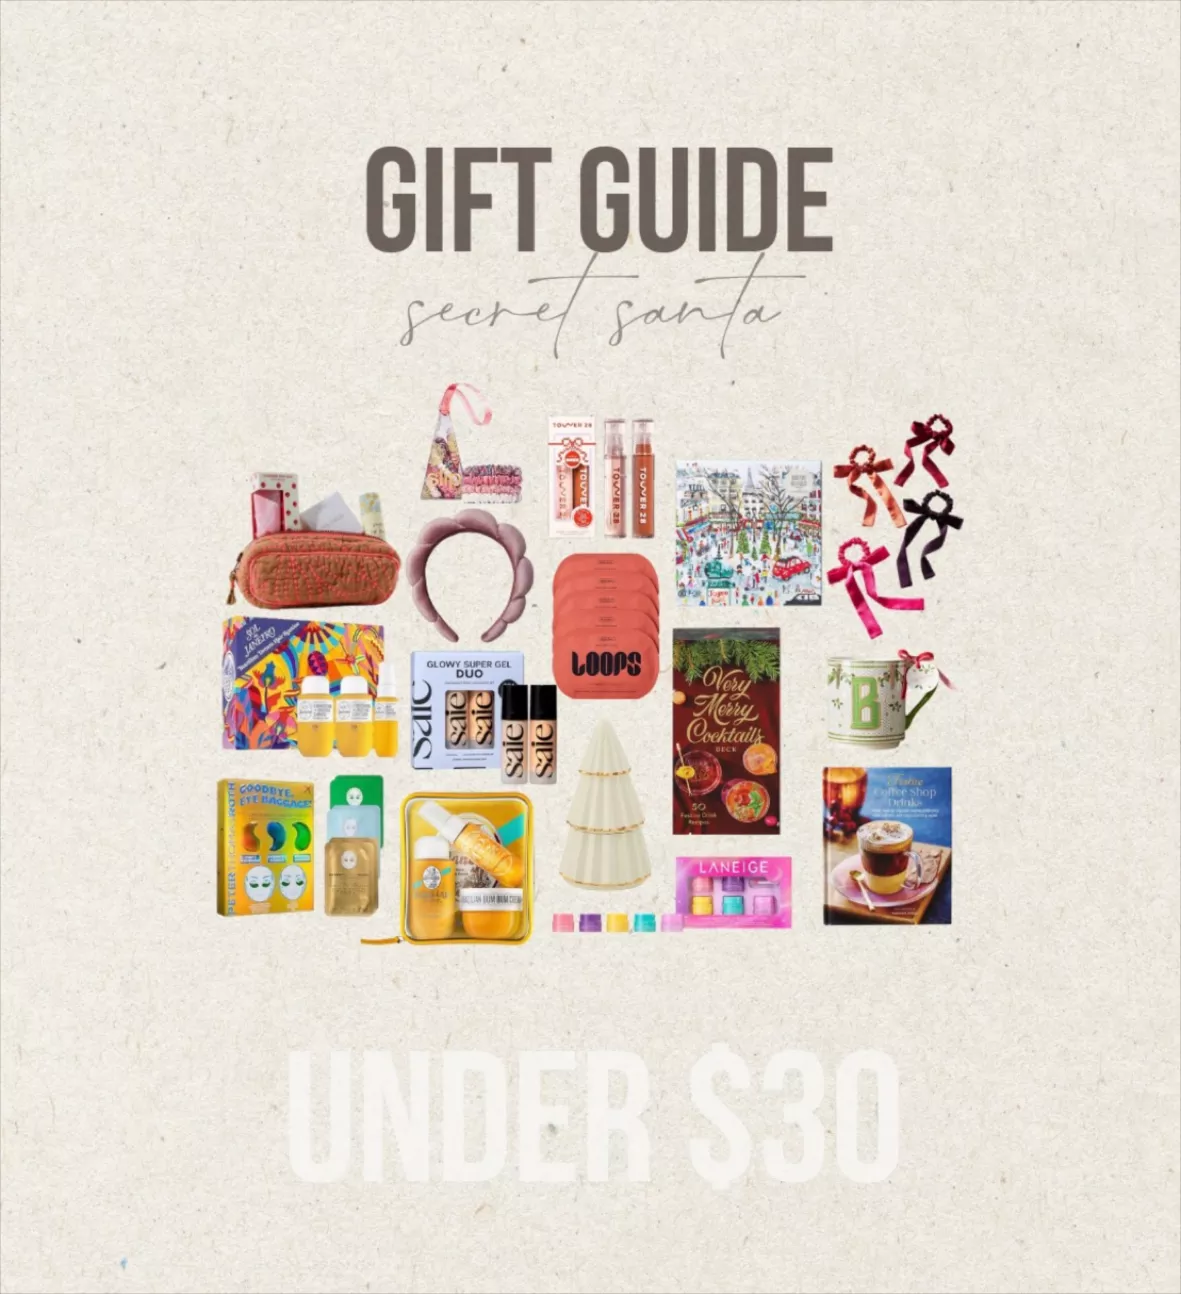 Holiday Gift Guide : Under $30